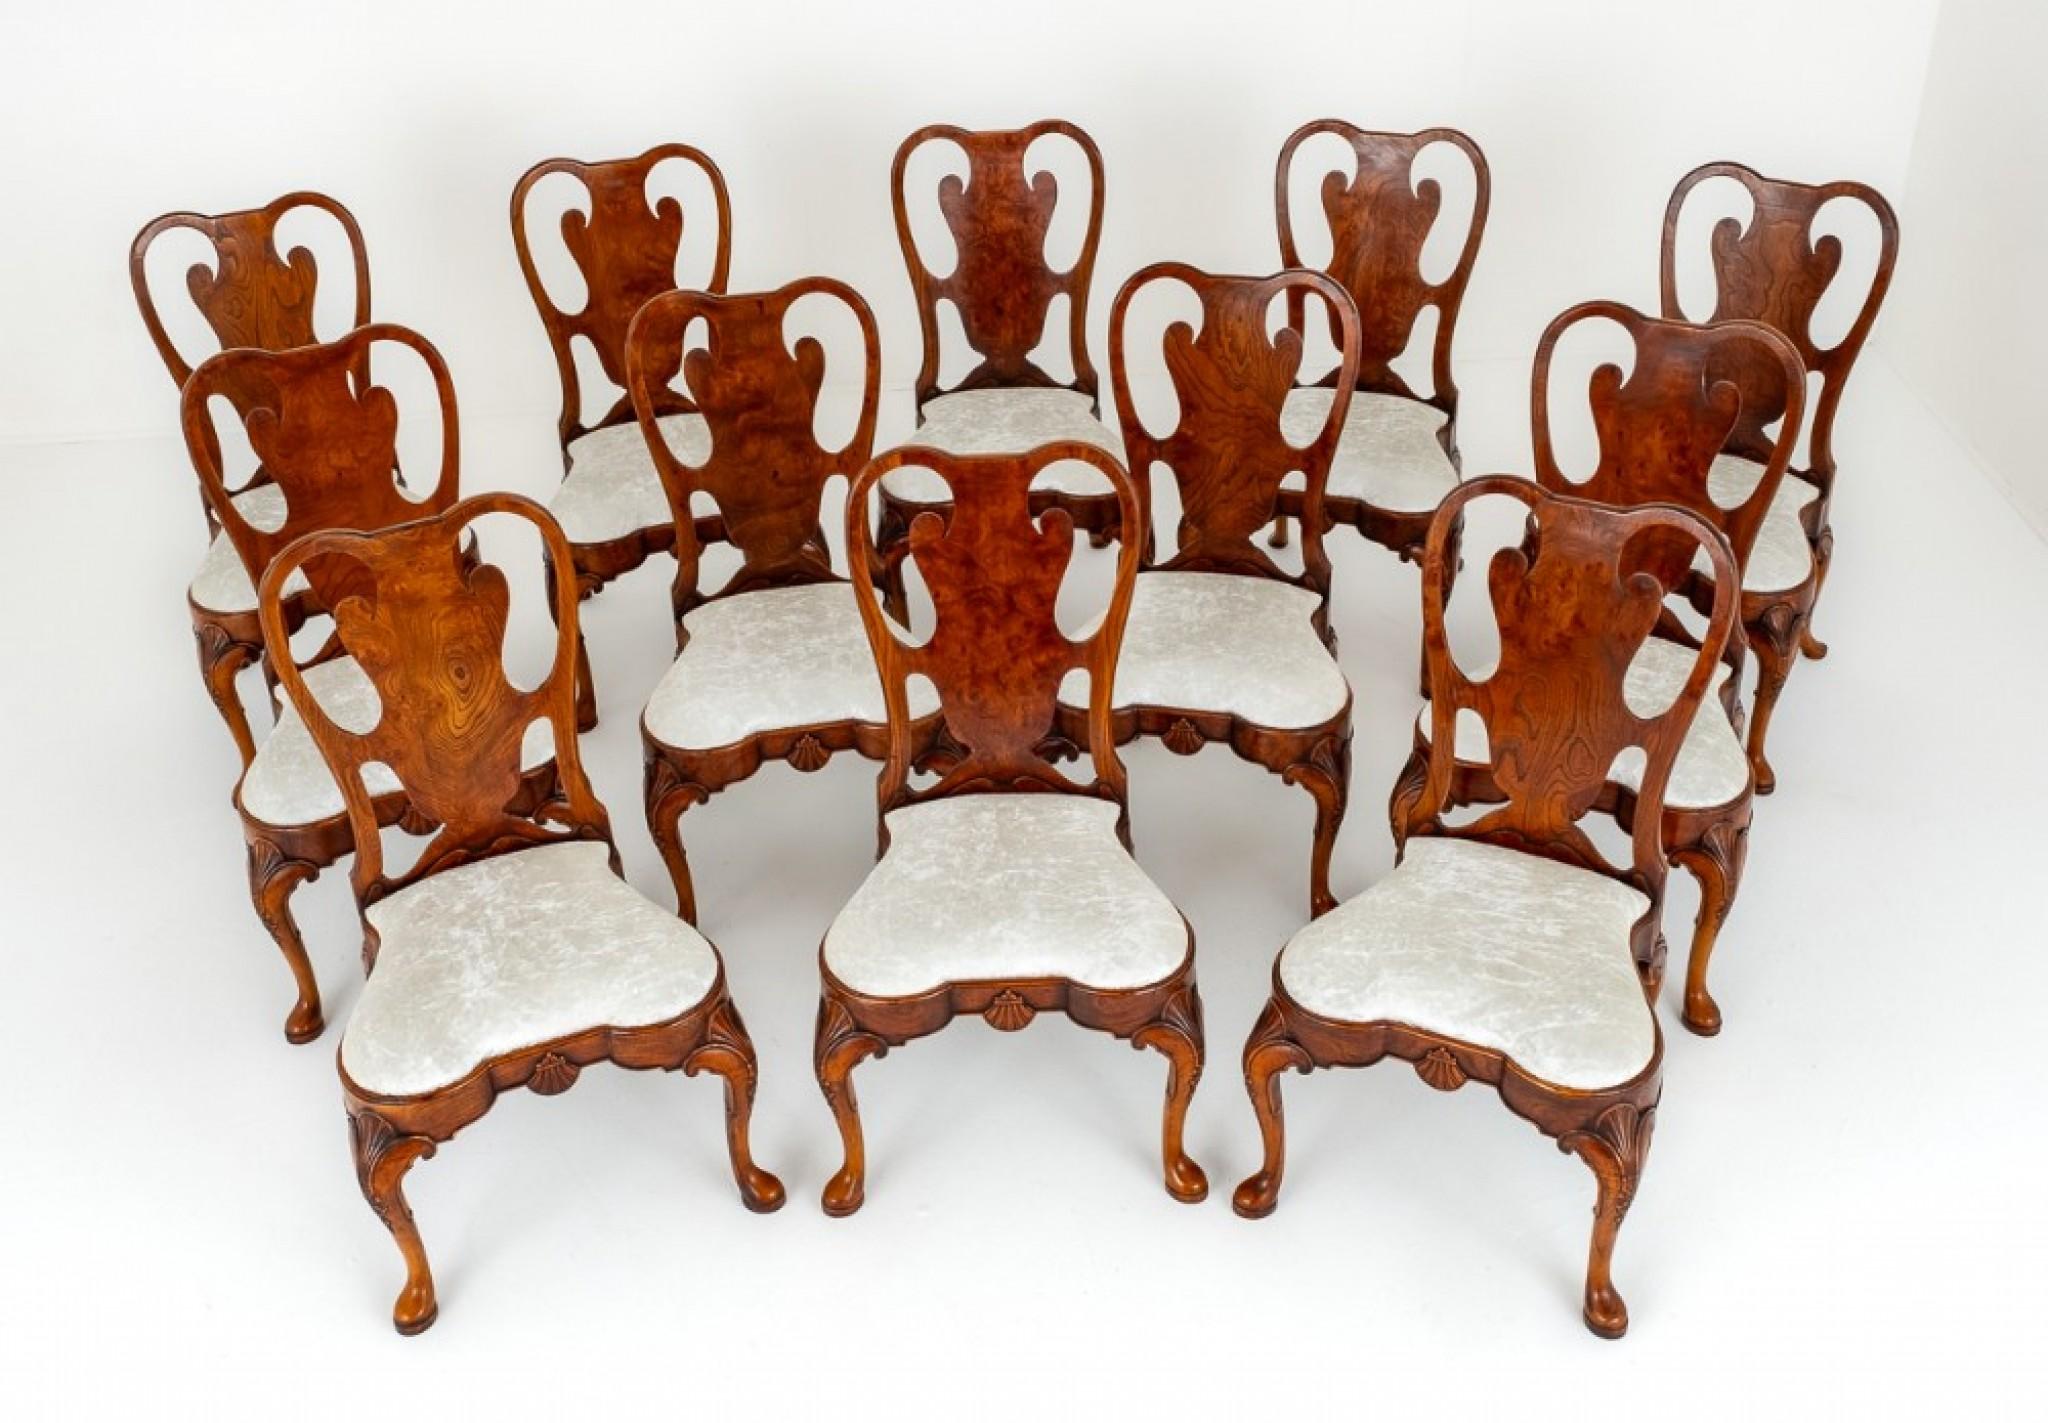 Set of 12 Queen Anne Style Dining Chairs.
These Chairs are in the Style of Giles Grendey.
Circa 1920
The Chairs are Raised Upon Cabriole Legs with Pad Feet, Having Carved Shells to the Knees.
The Back Legs being of a Typical Queen Anne Style